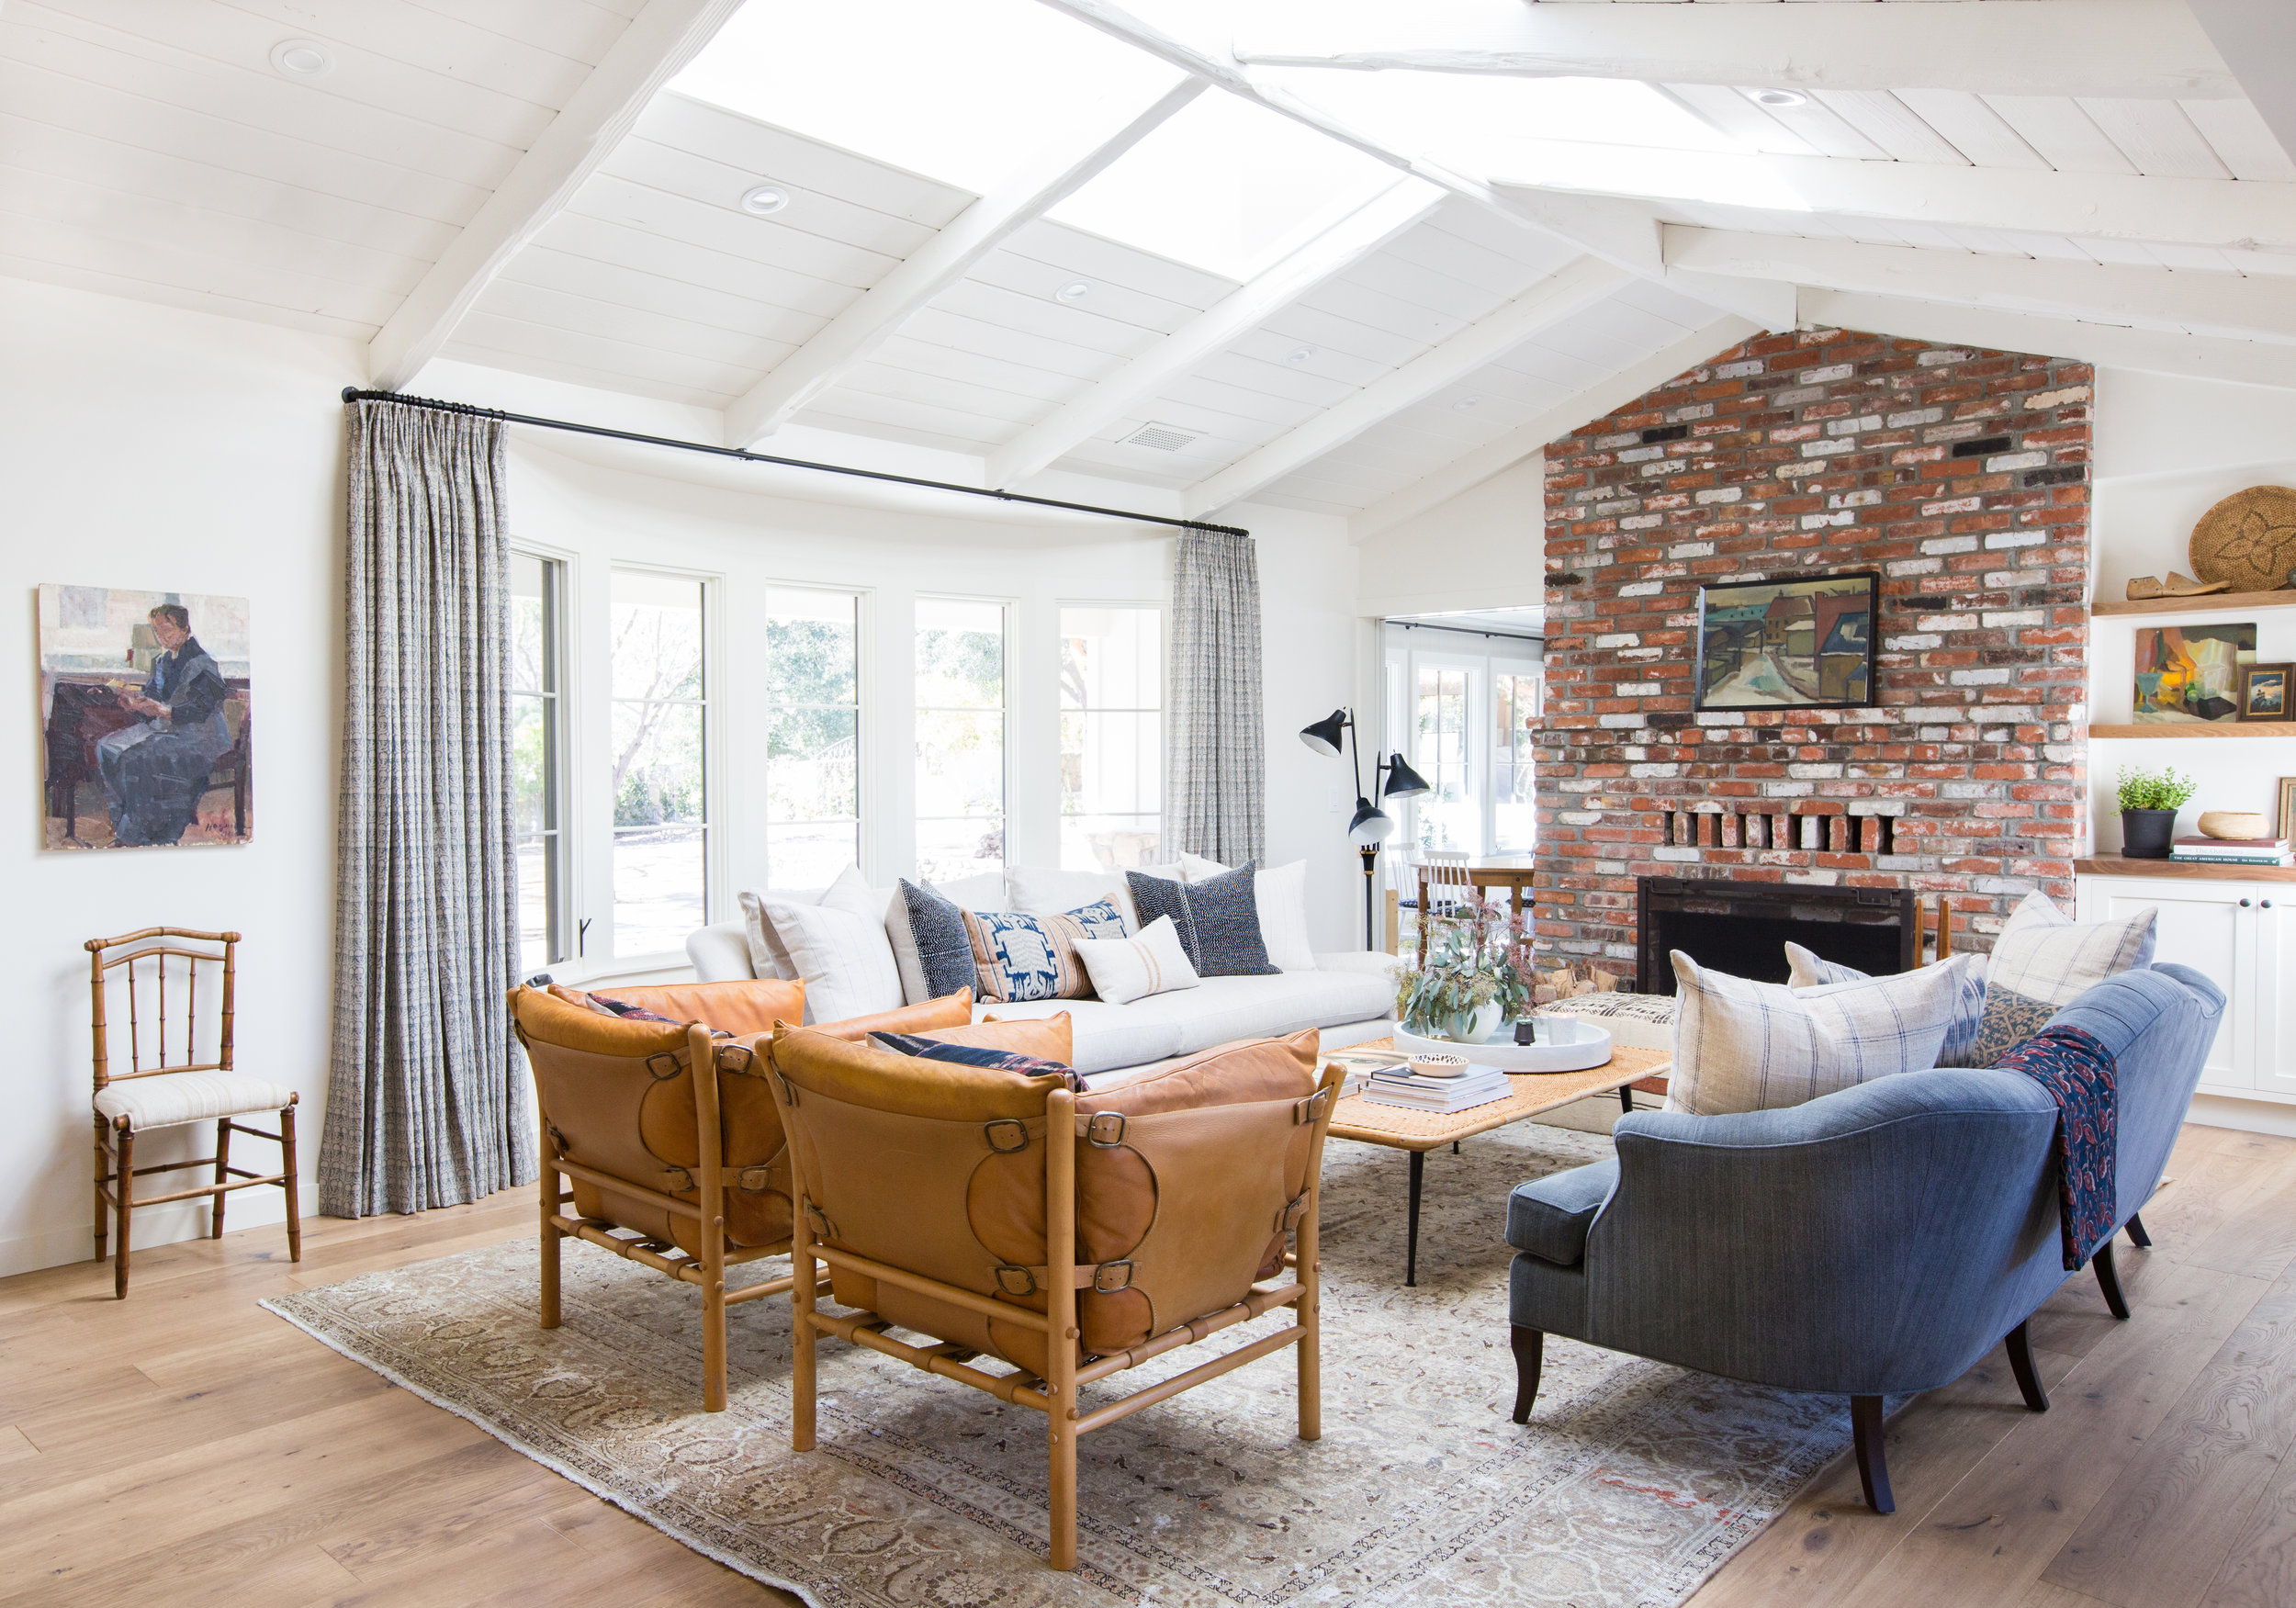 A bright and airy family home